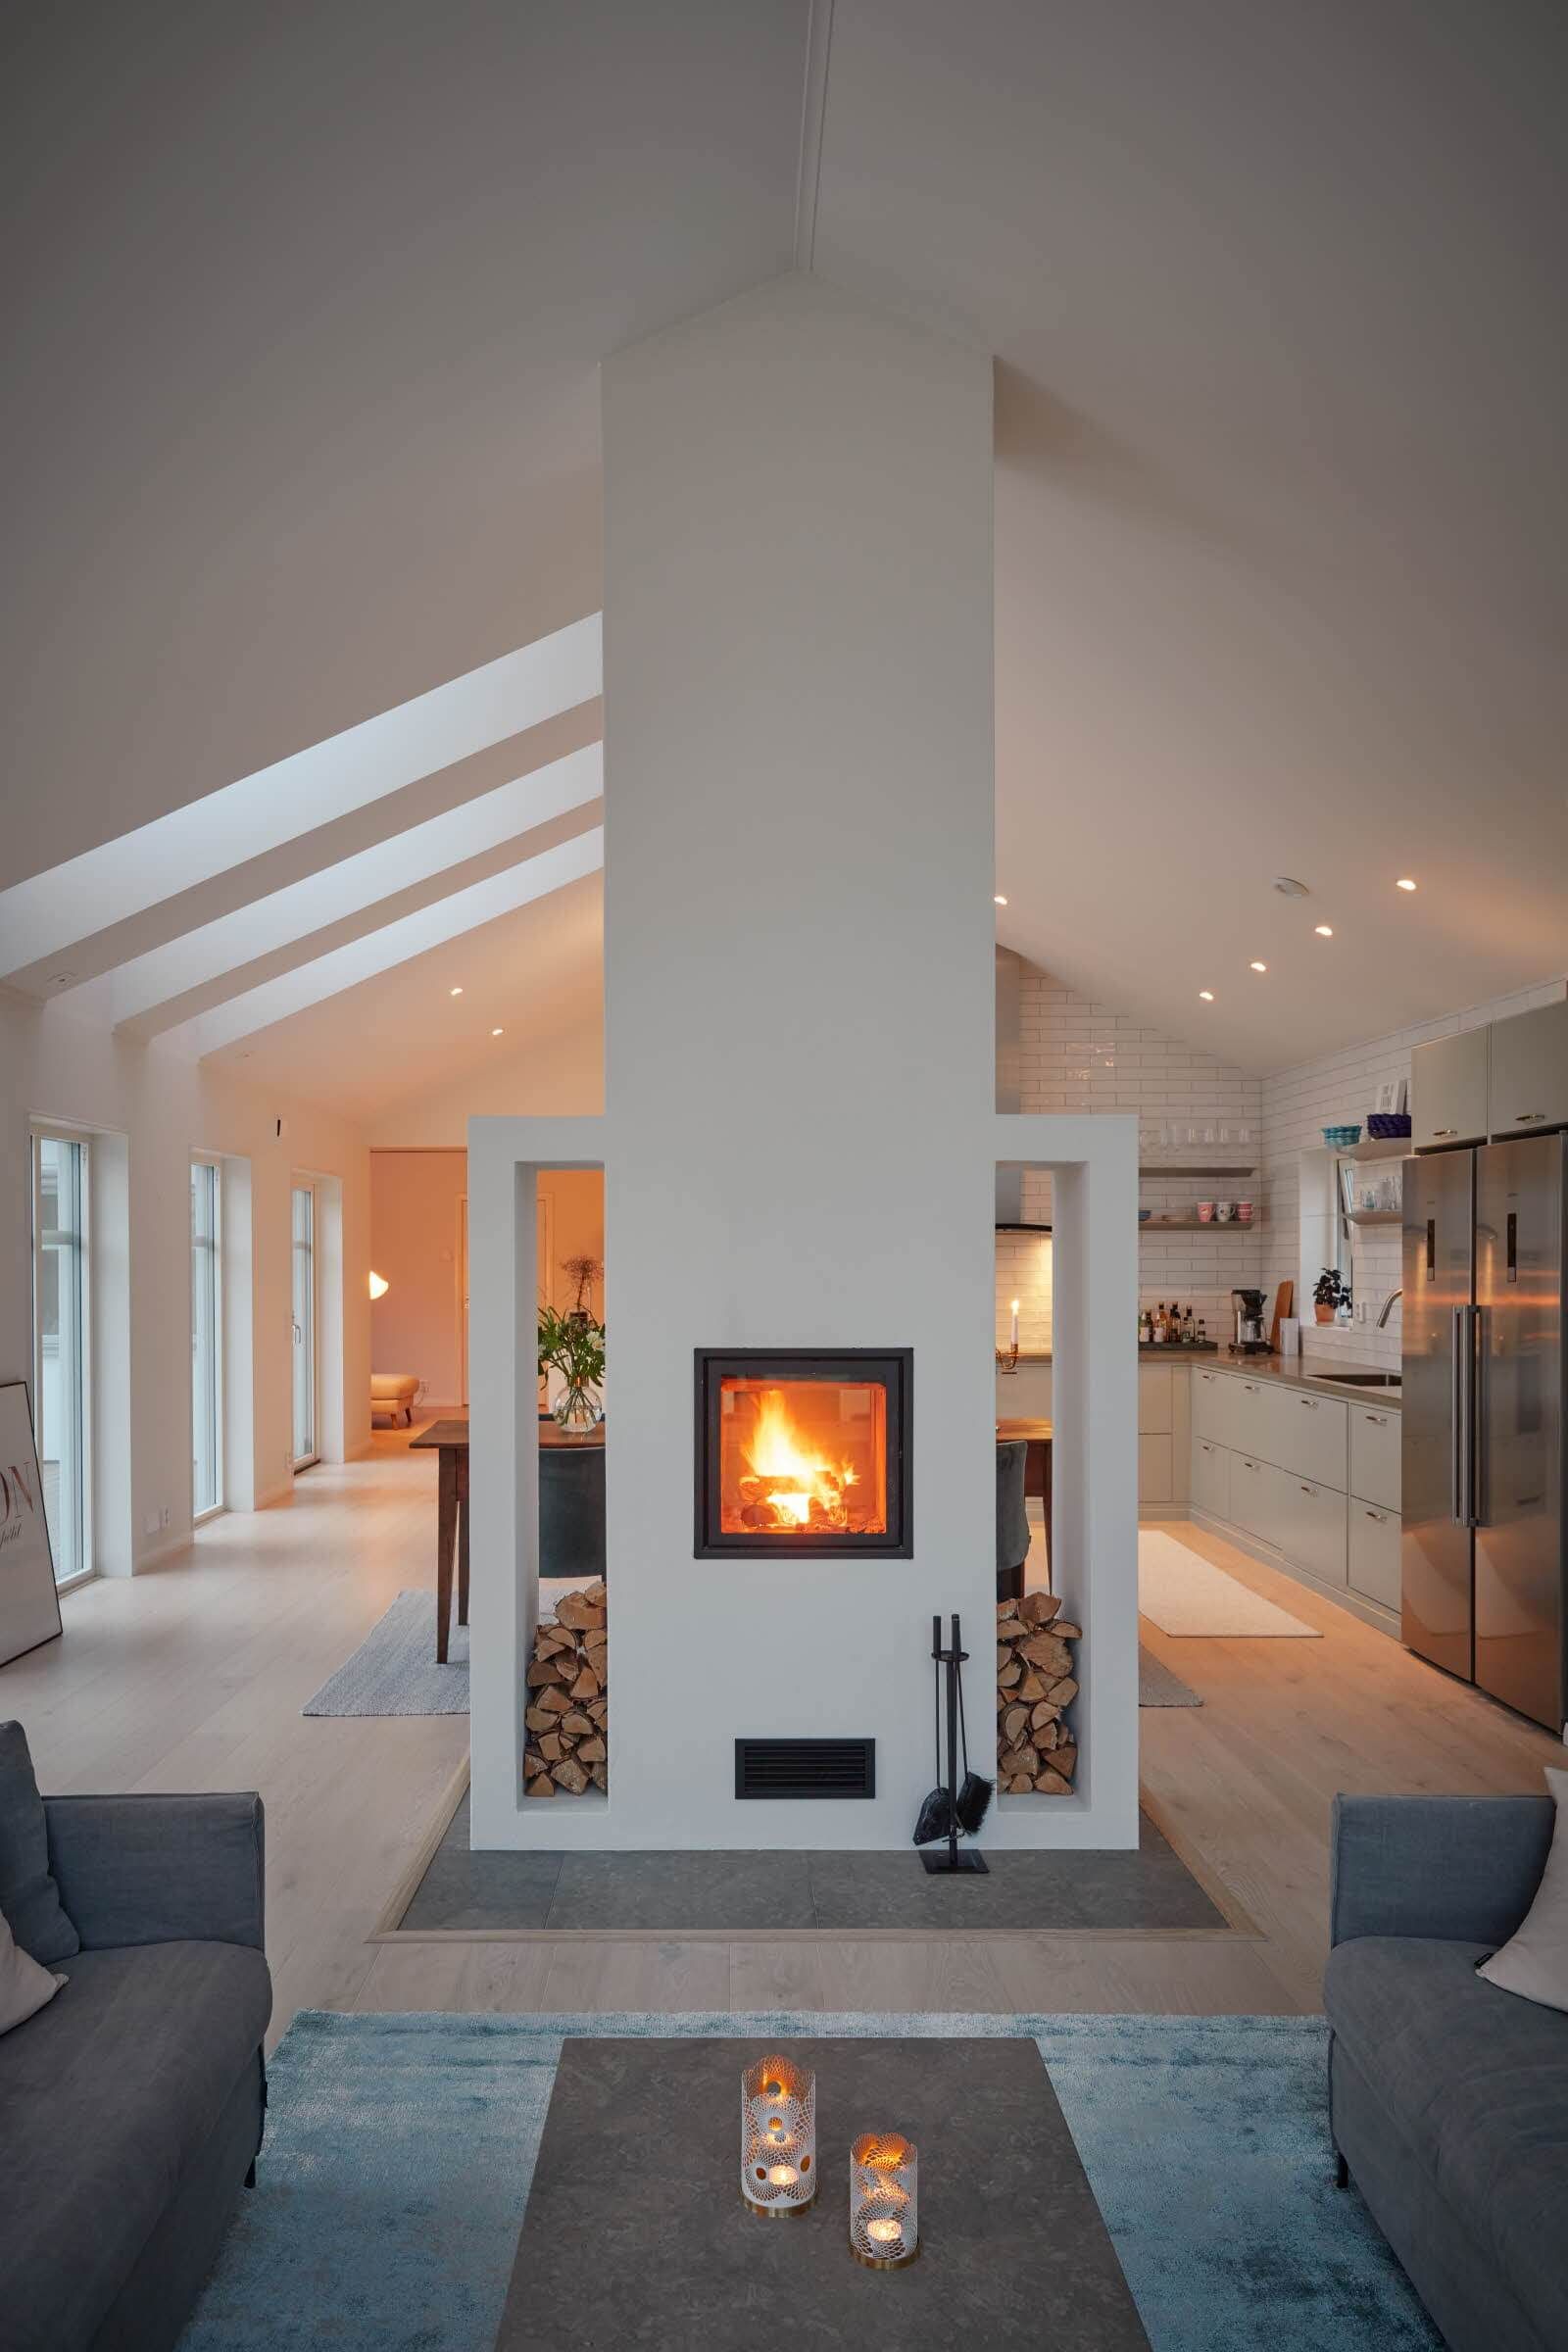 Architectural Fireplaces New 16 Gorgeous Double Sided Fireplace Design Ideas Take A Look